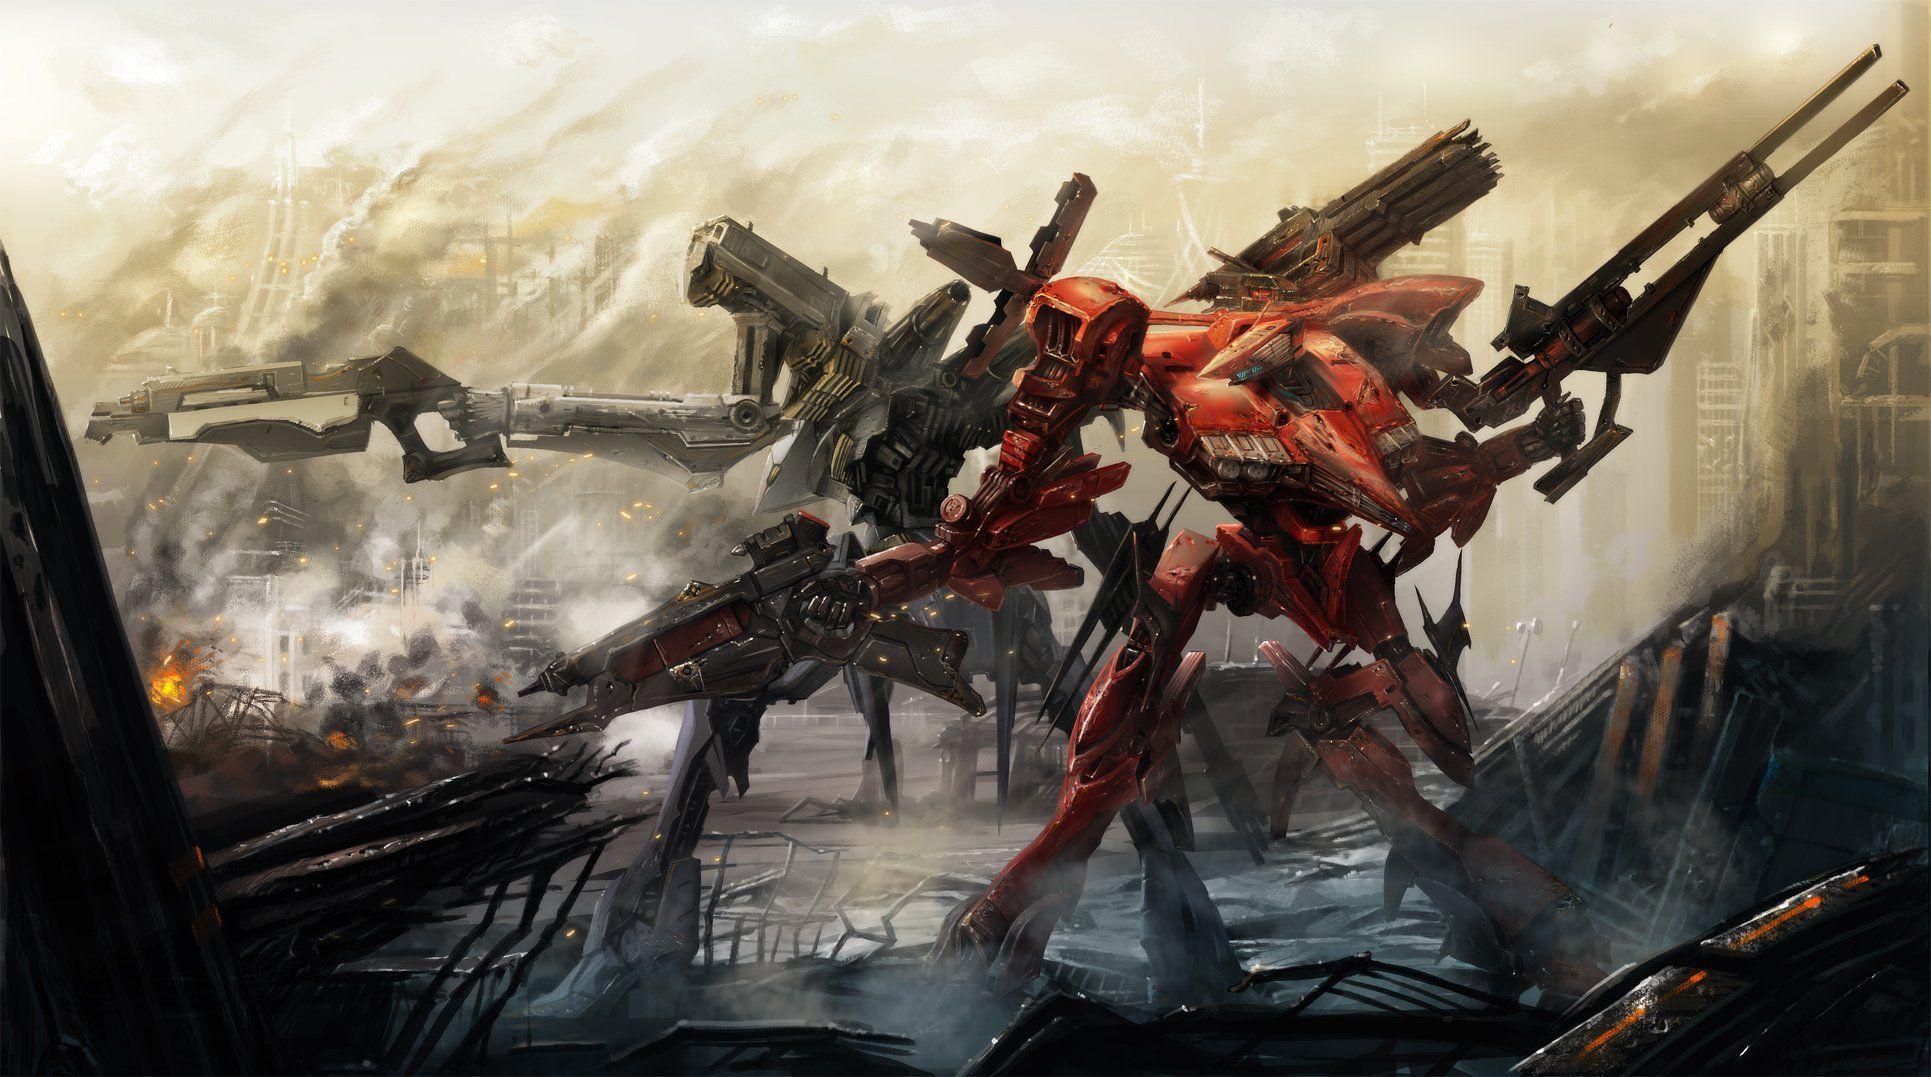 download the new for mac Armored Core VI: Fires of Rubicon